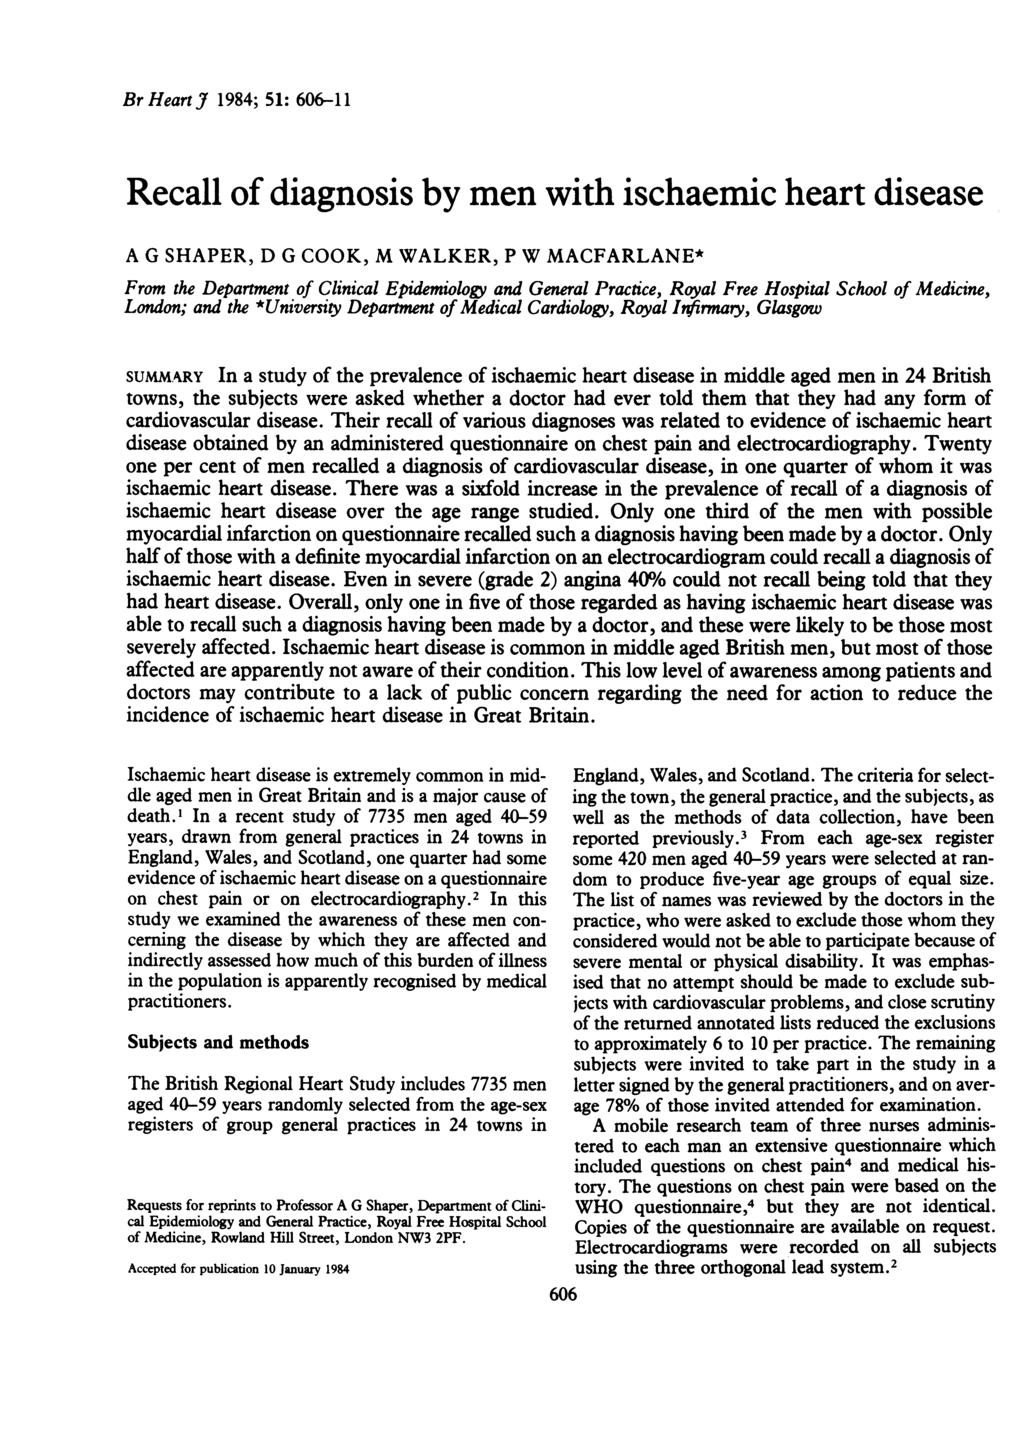 Br Heart J 1984; 51: 606-11 Recall of diagnosis by men with ischaemic heart disease A G SHAPER, D G COOK, M WALKER, P W MACFARLANE* From the Department of Clinical Epidemiology and General Practice,